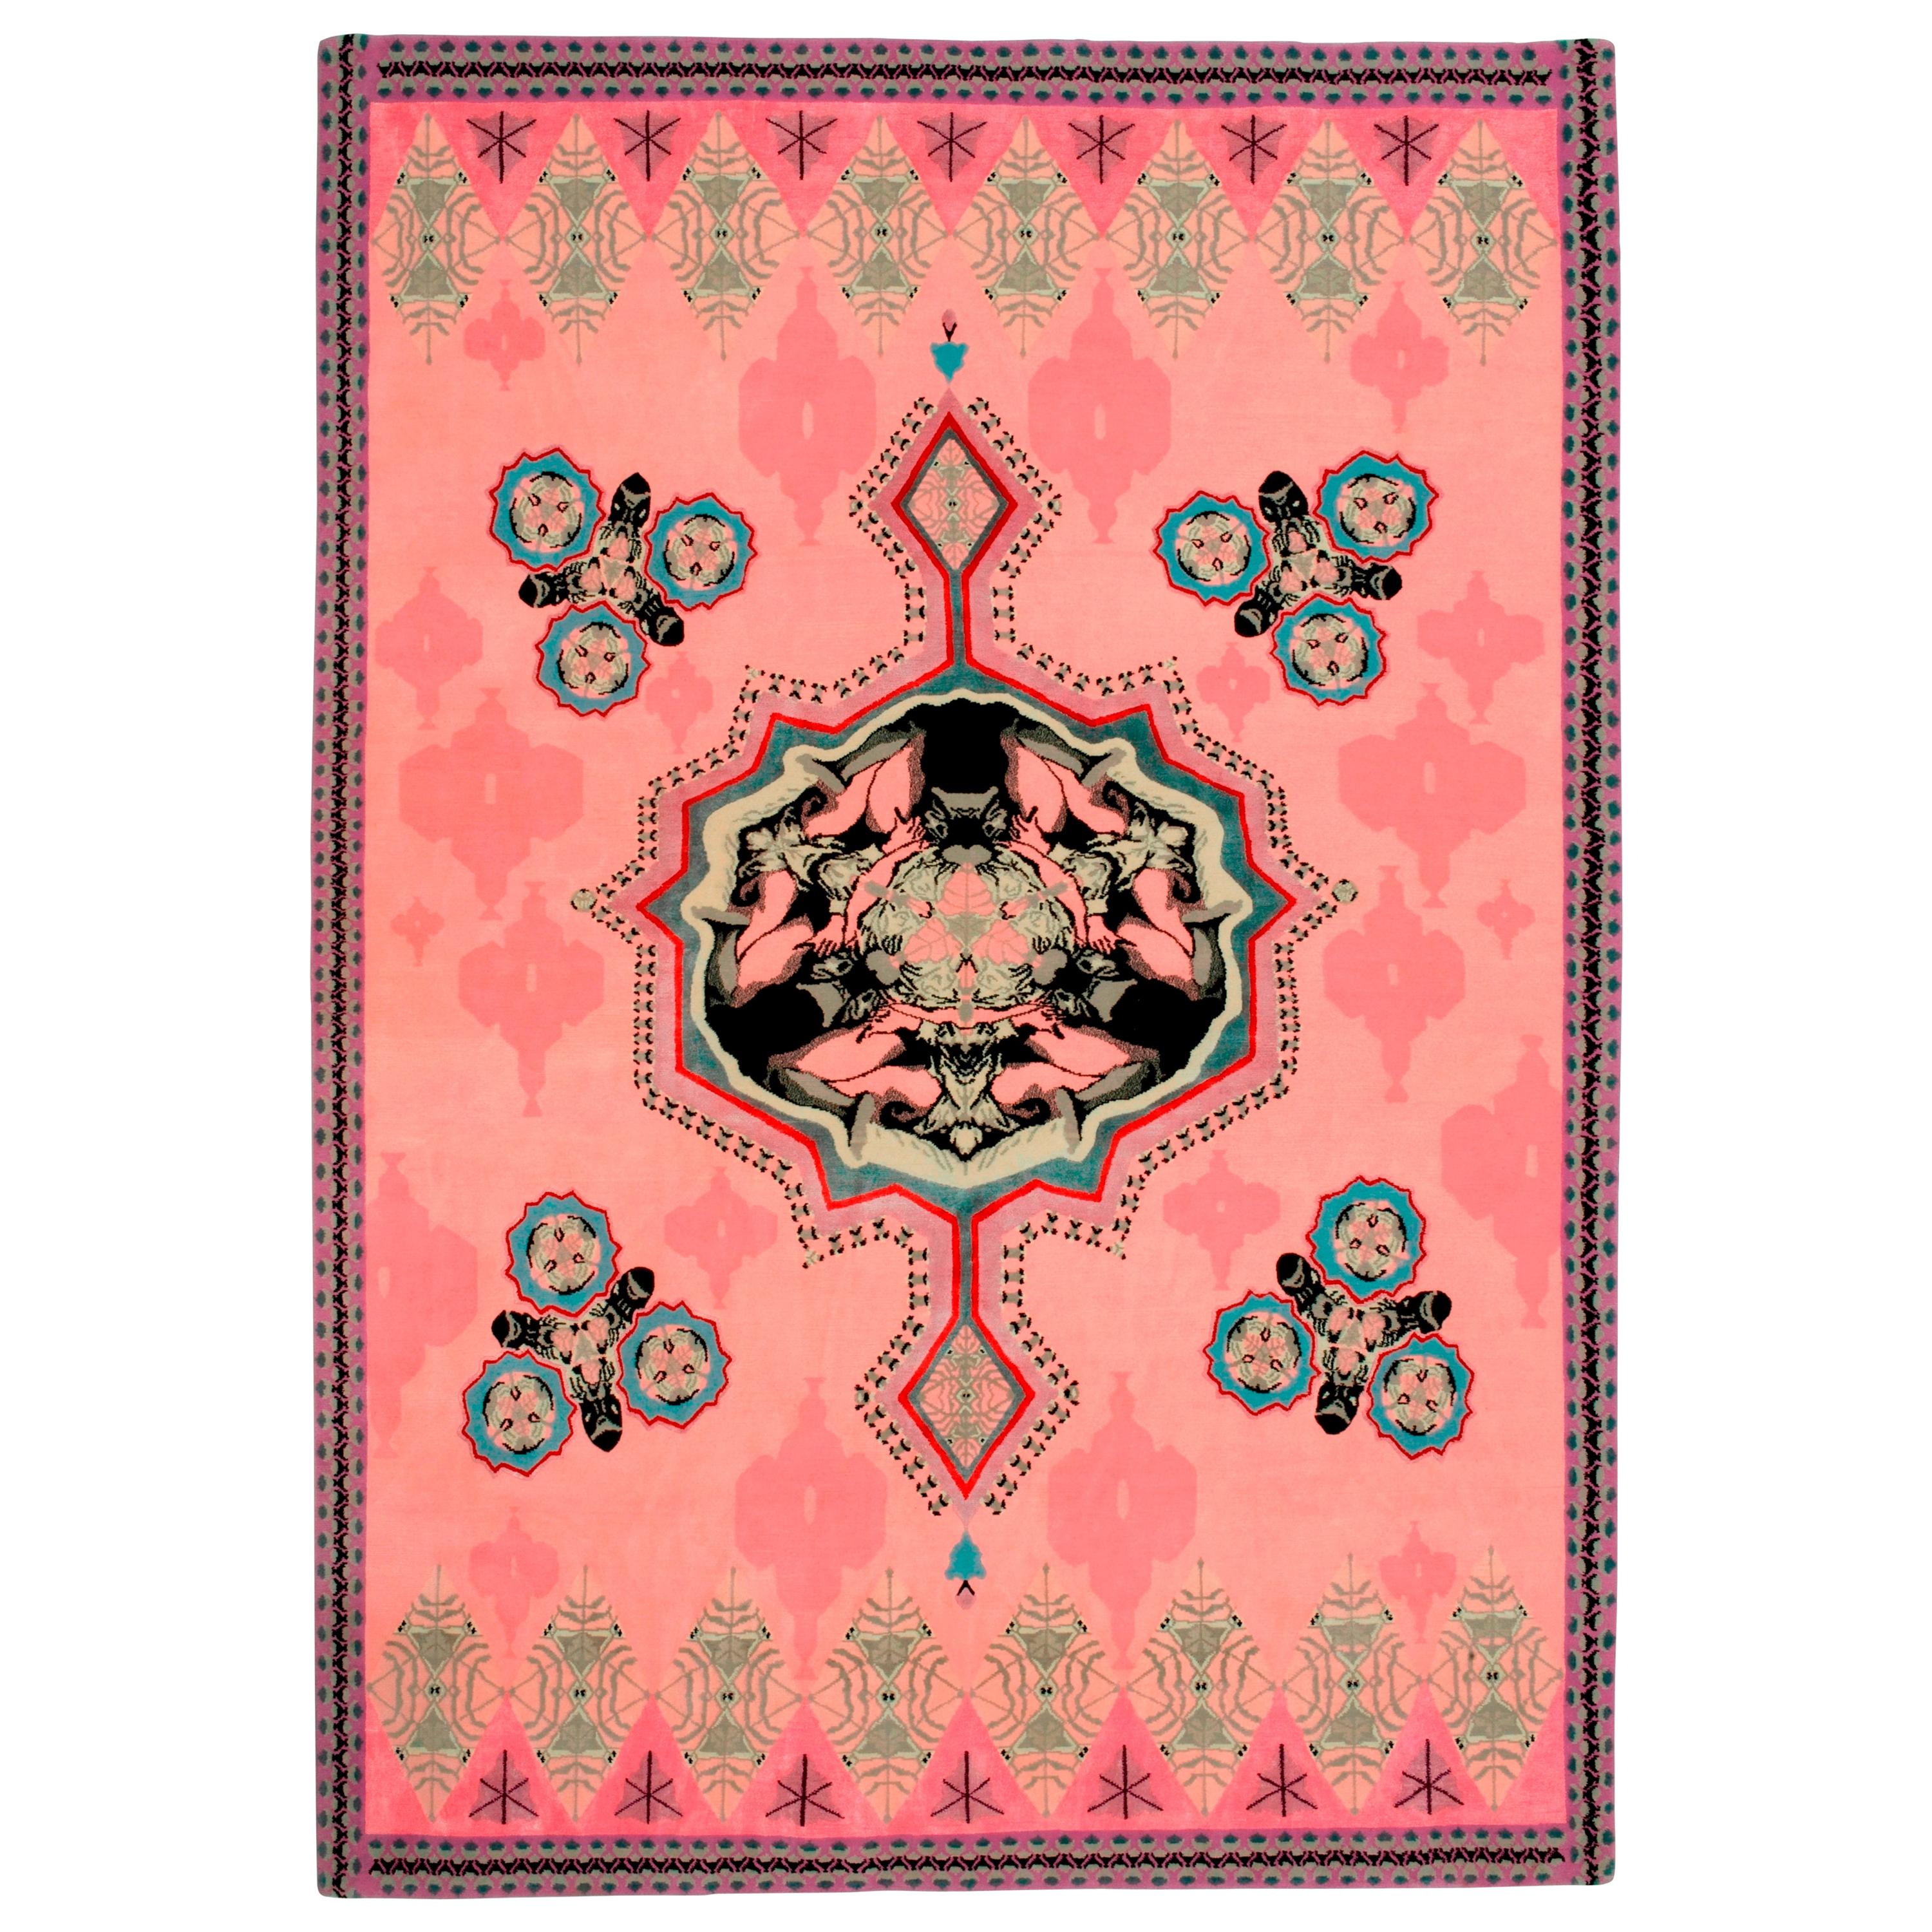 Eros Carpet, Hand Knotted in Wool and Silk 100 Kpi, Sofie Lachaert & Luc d'Hanis